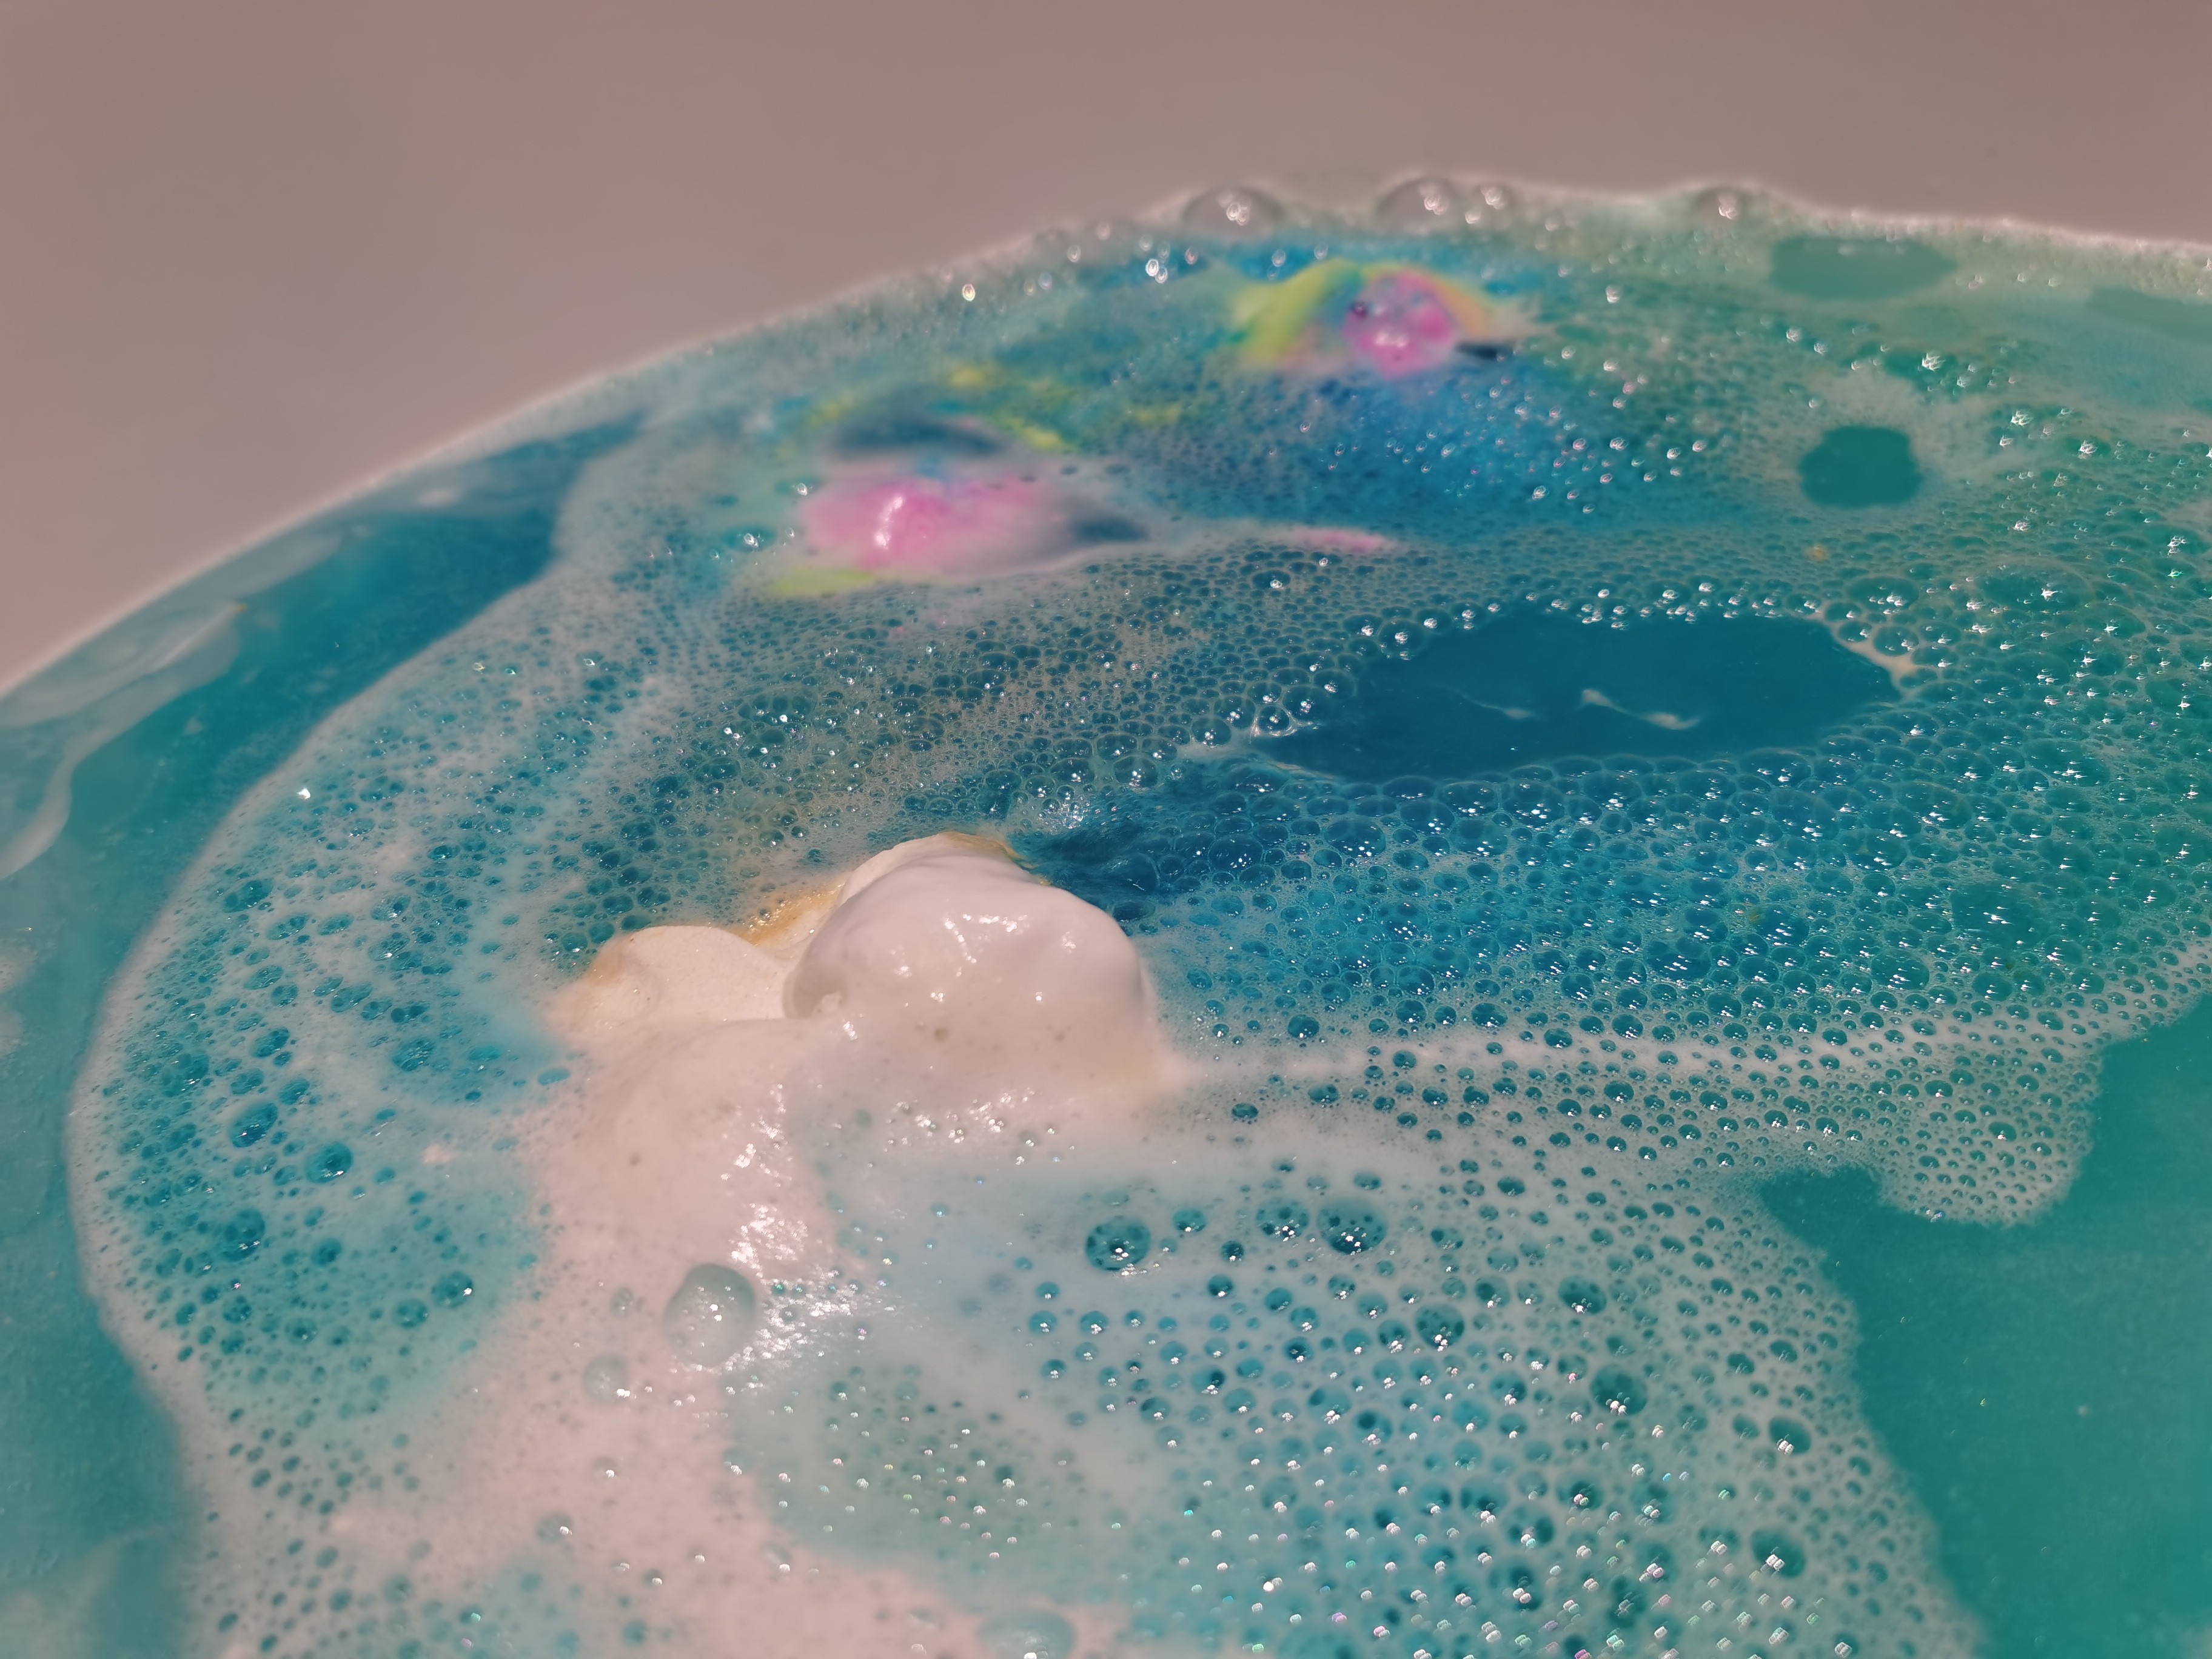 Golden Wonder Bath Bomb by Lush dissolving into blue water and releasing rainbow embeds